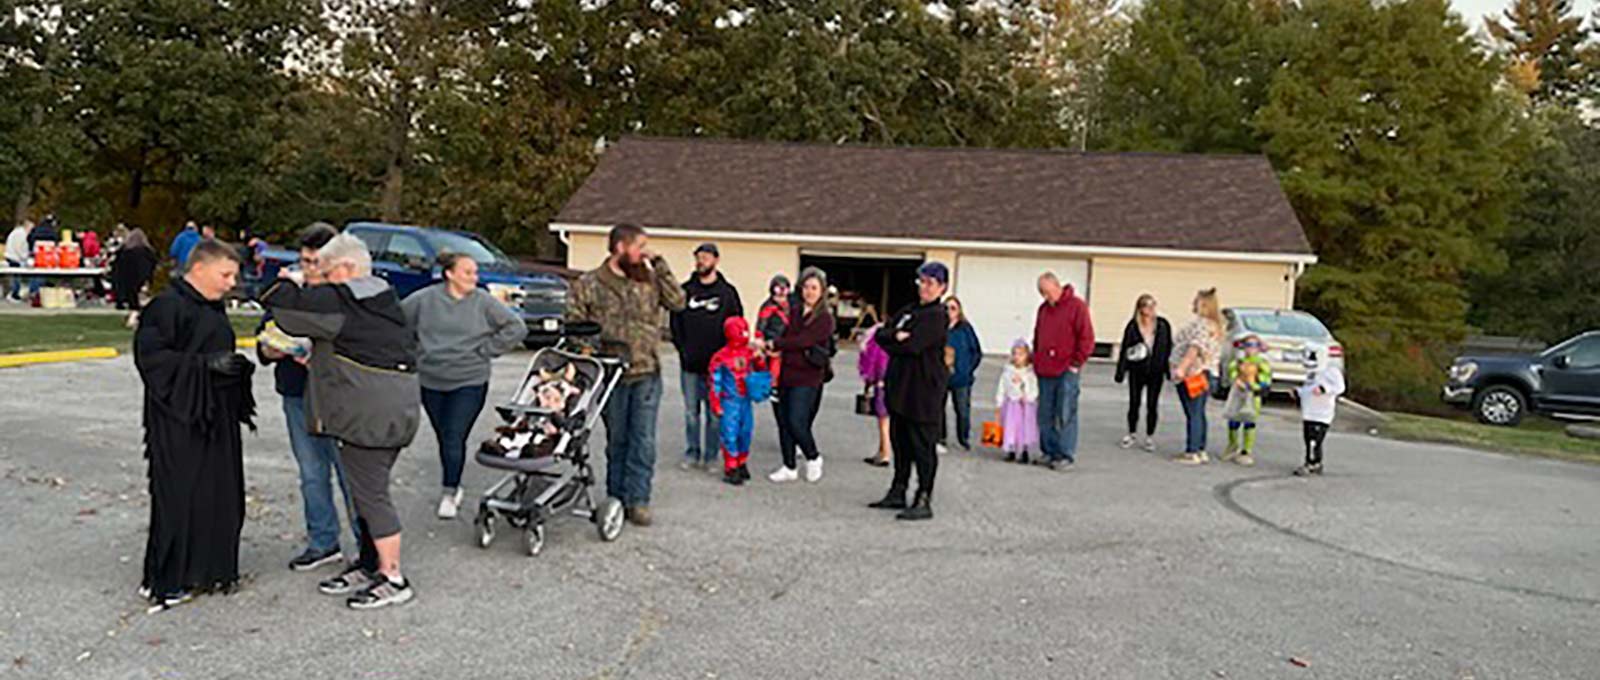 children in line receiving candy at our annual trunk or treat event